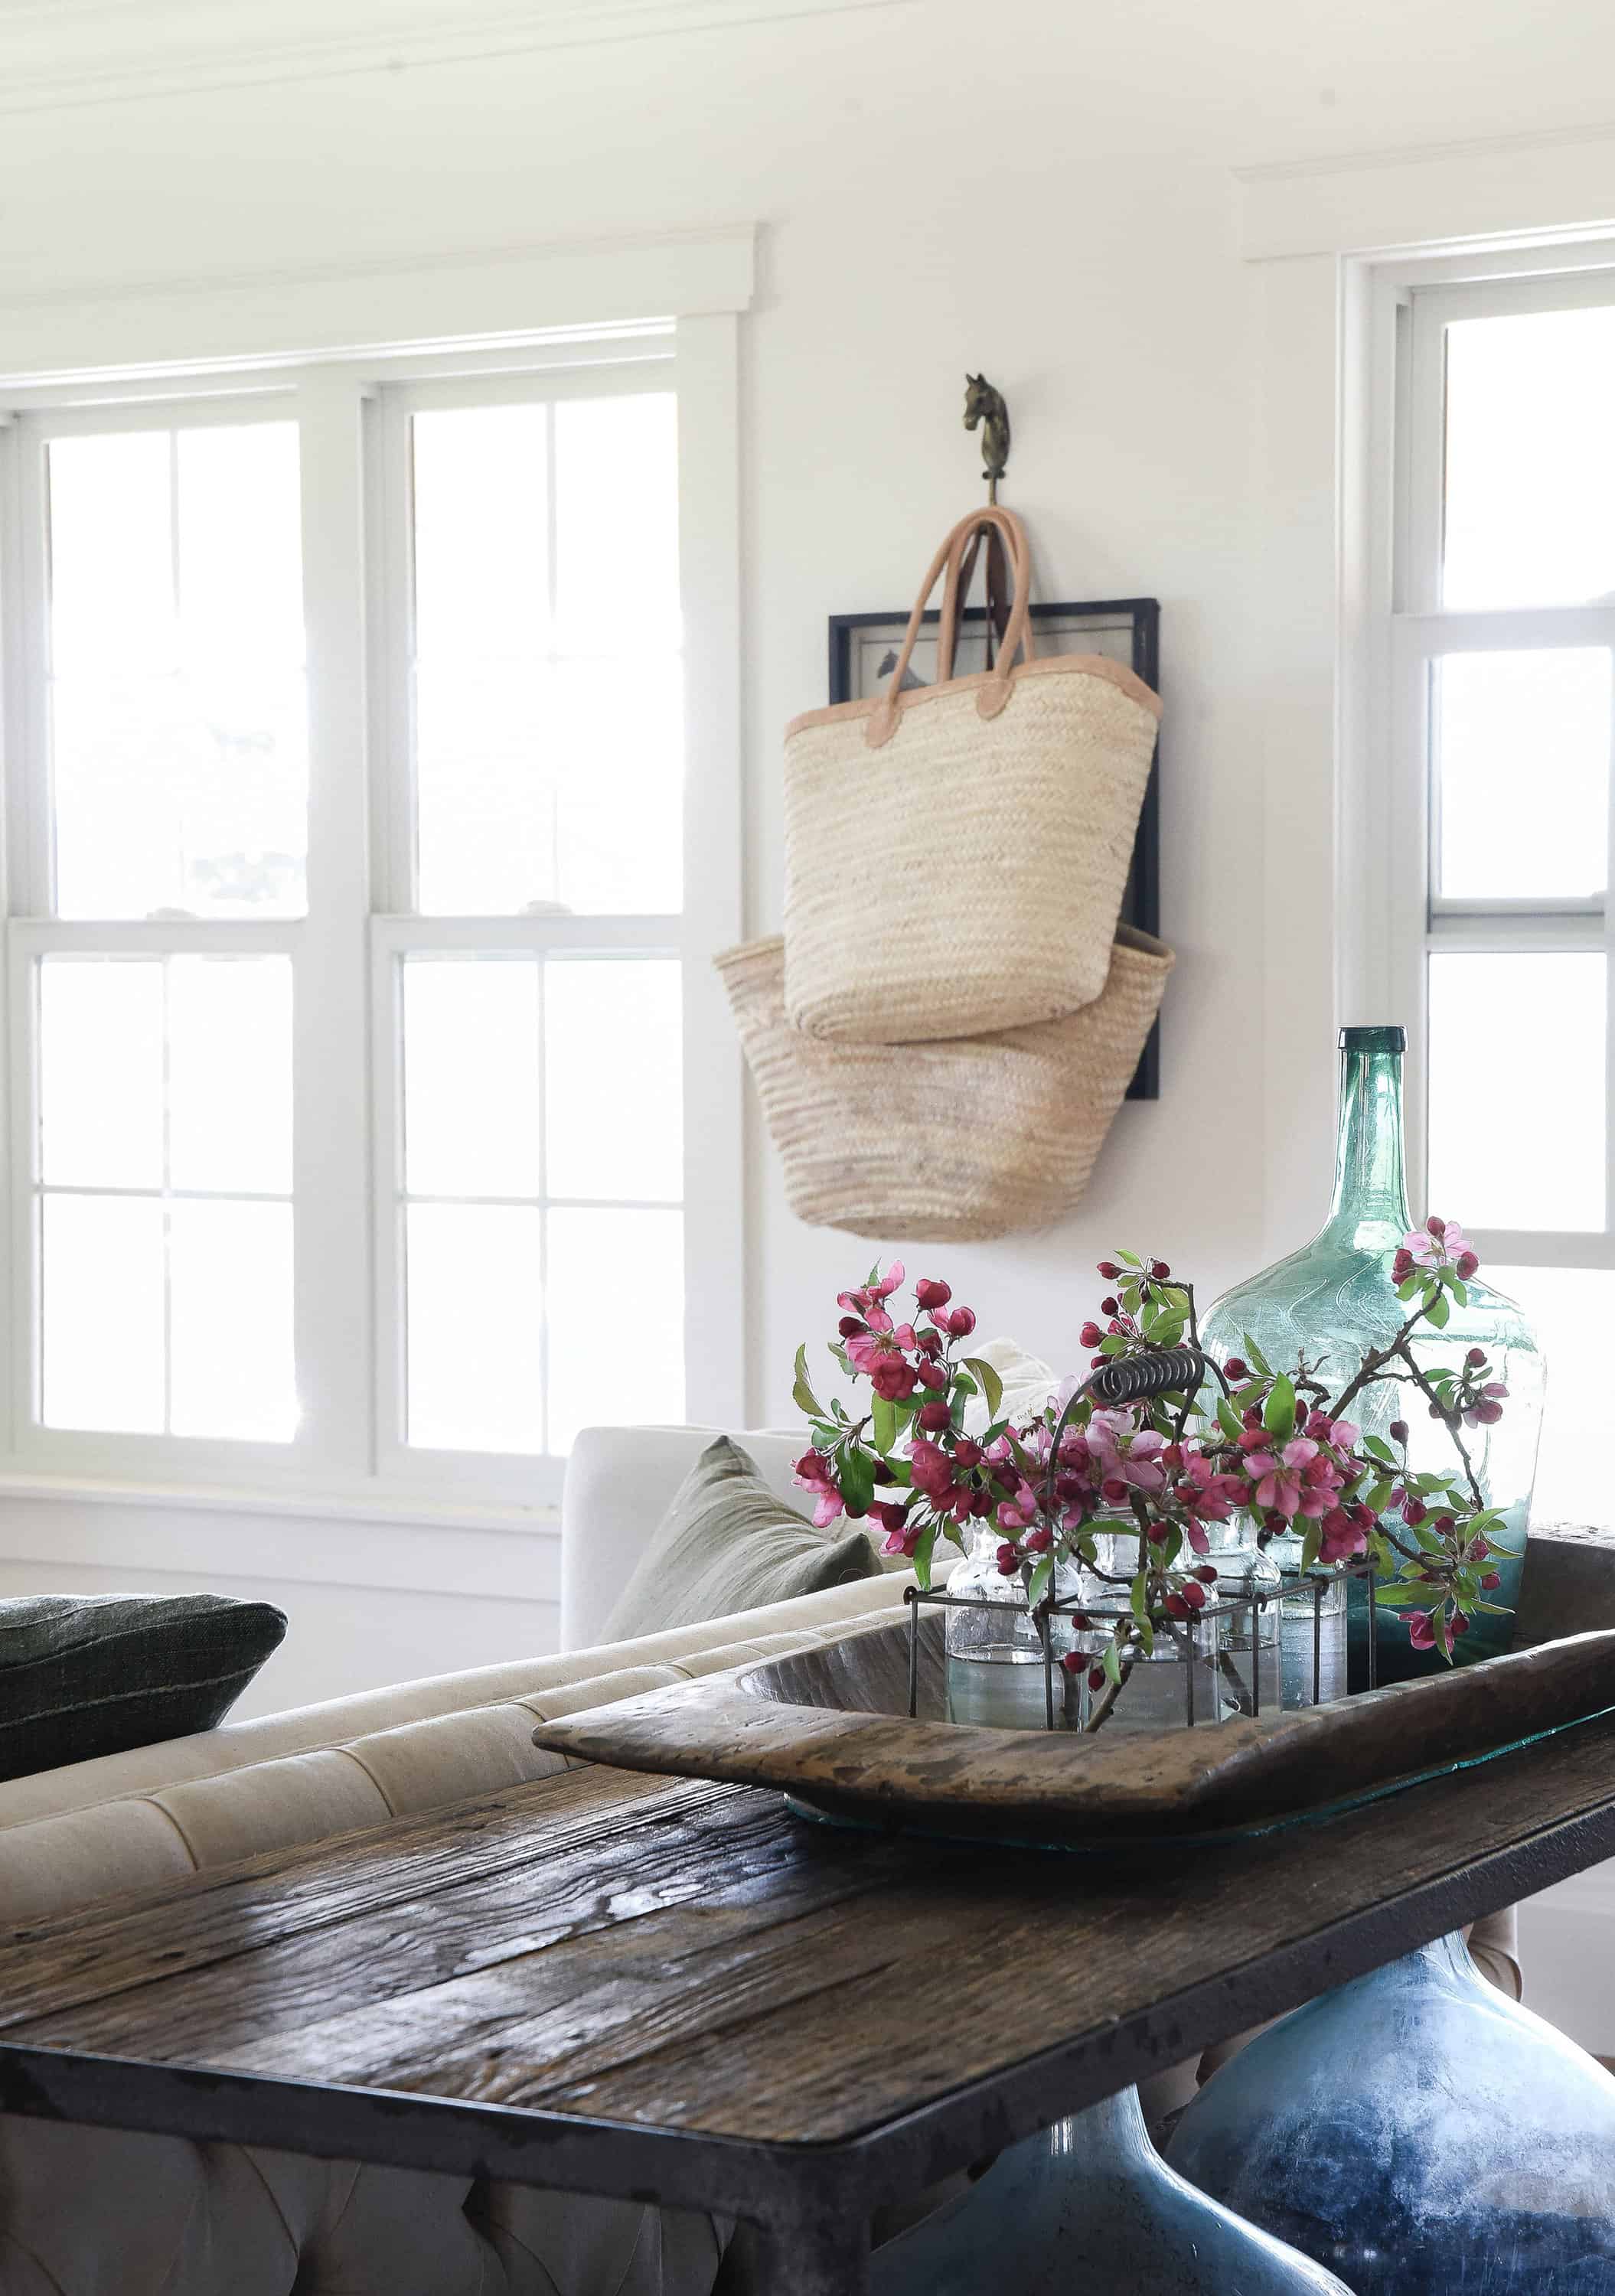 As the weather warms up, freshen up your home with some simple summer home decorating ideas!